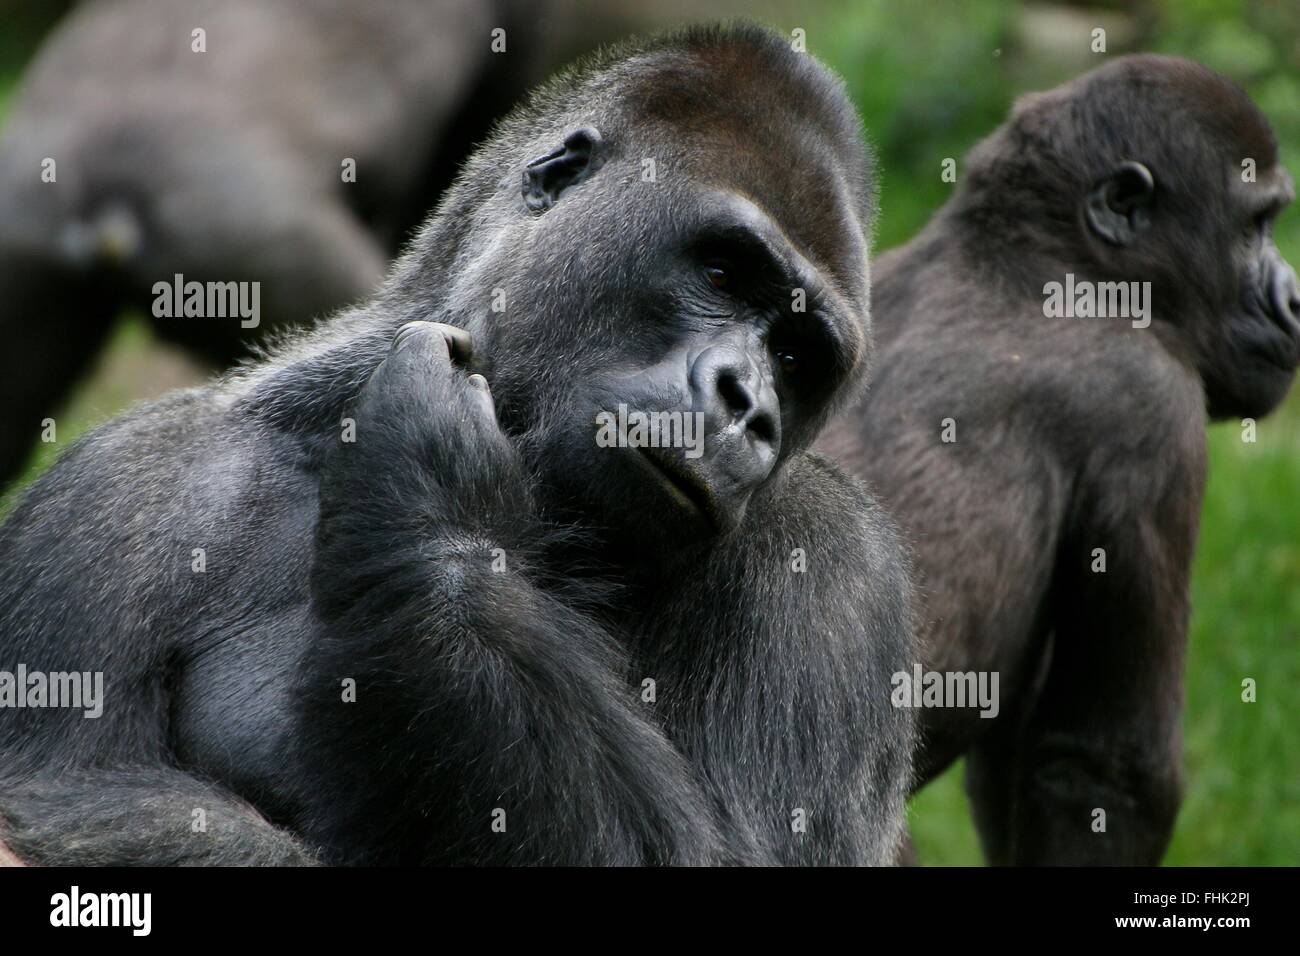 Mature Western lowland silverback gorilla scratching his chin absentmindedly Stock Photo